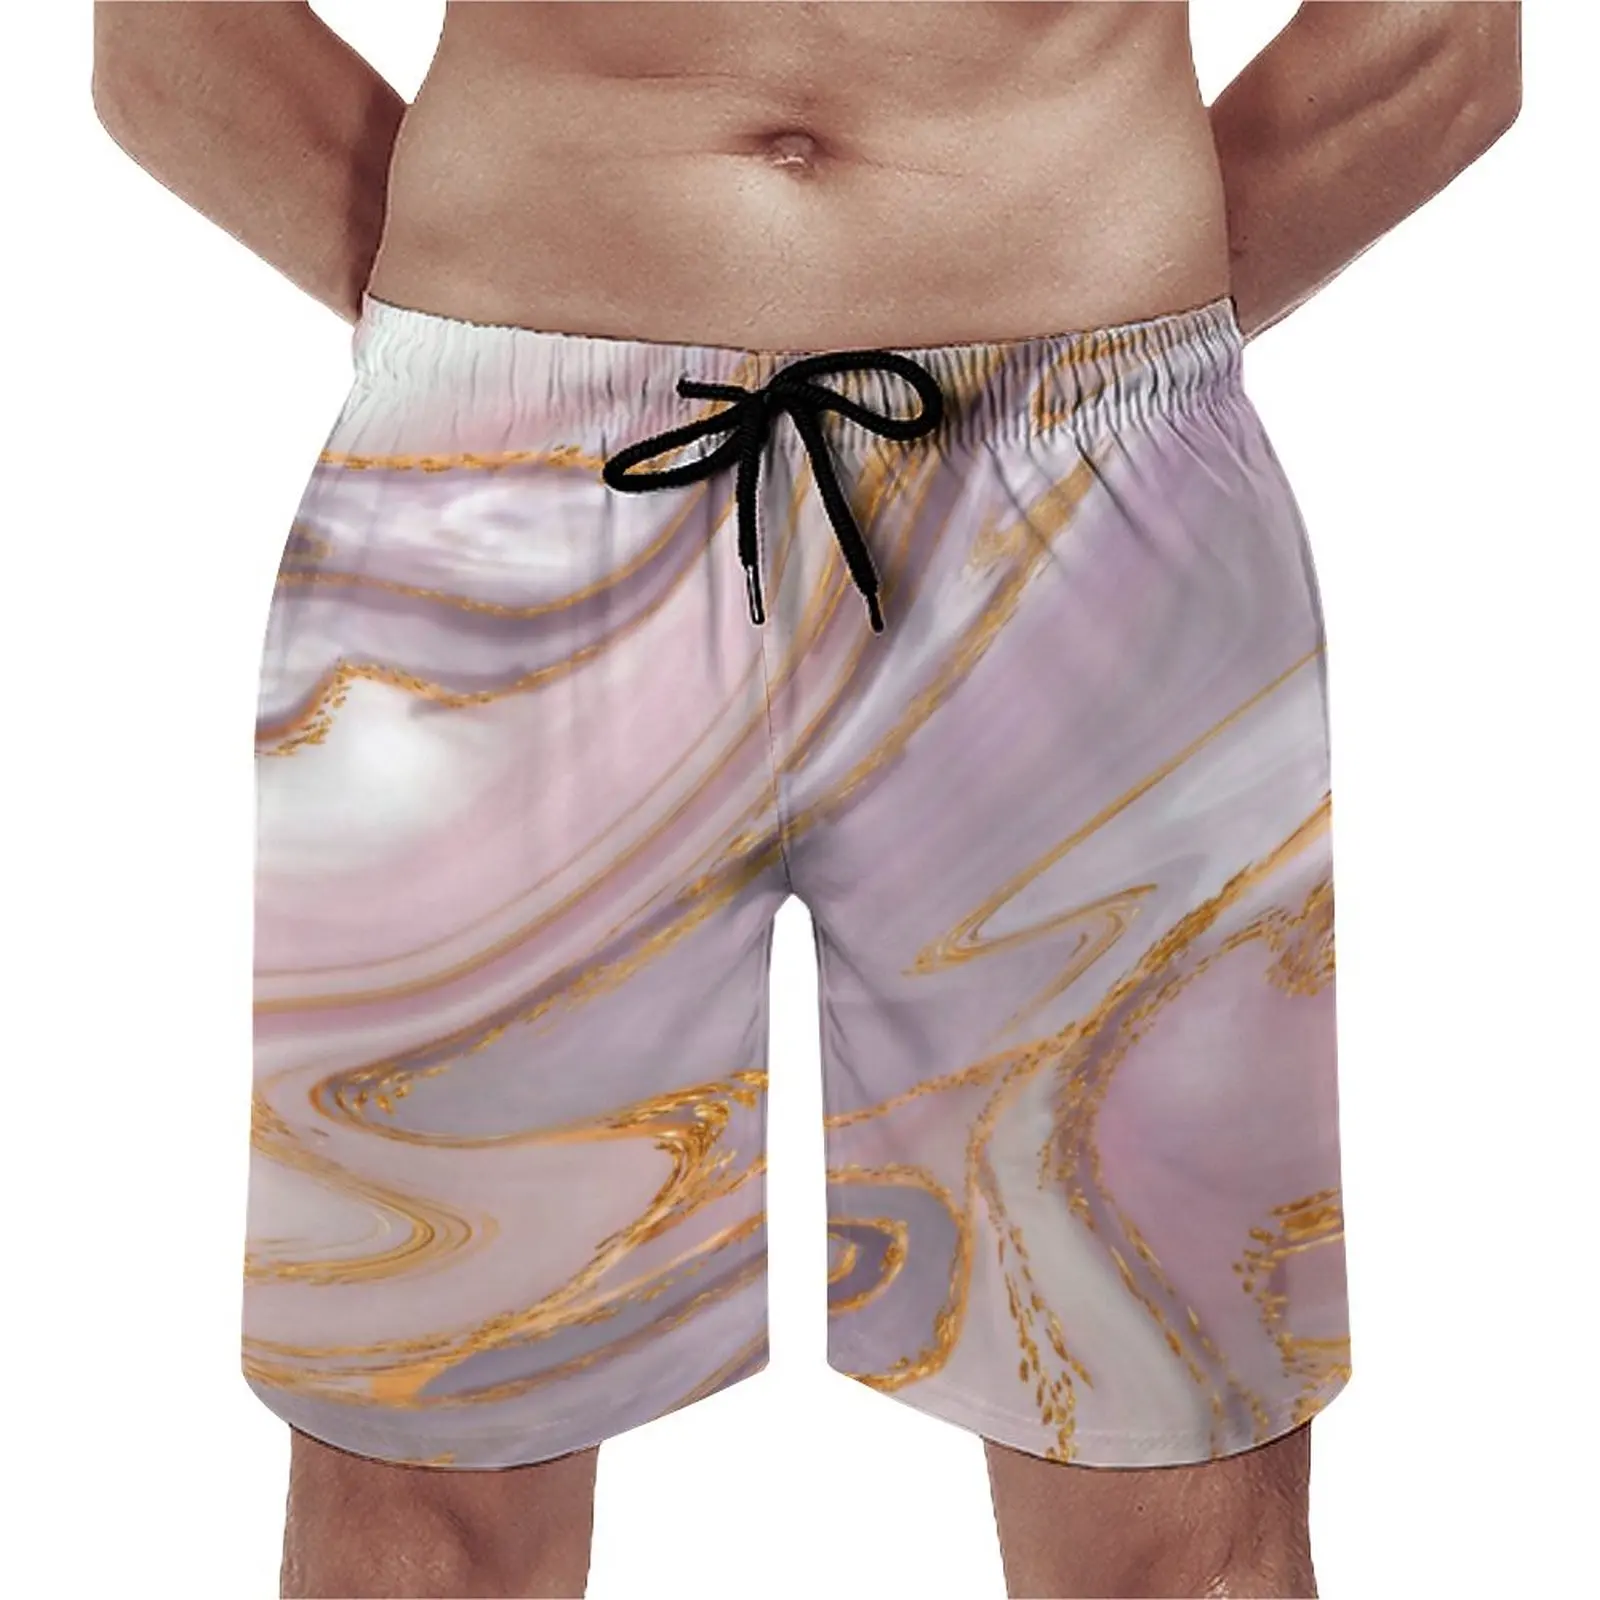 

Gold Liquid Print Board Shorts Rose Marble Casual Board Short Pants Males Design Sports Fitness Quick Dry Swim Trunks Gift Idea